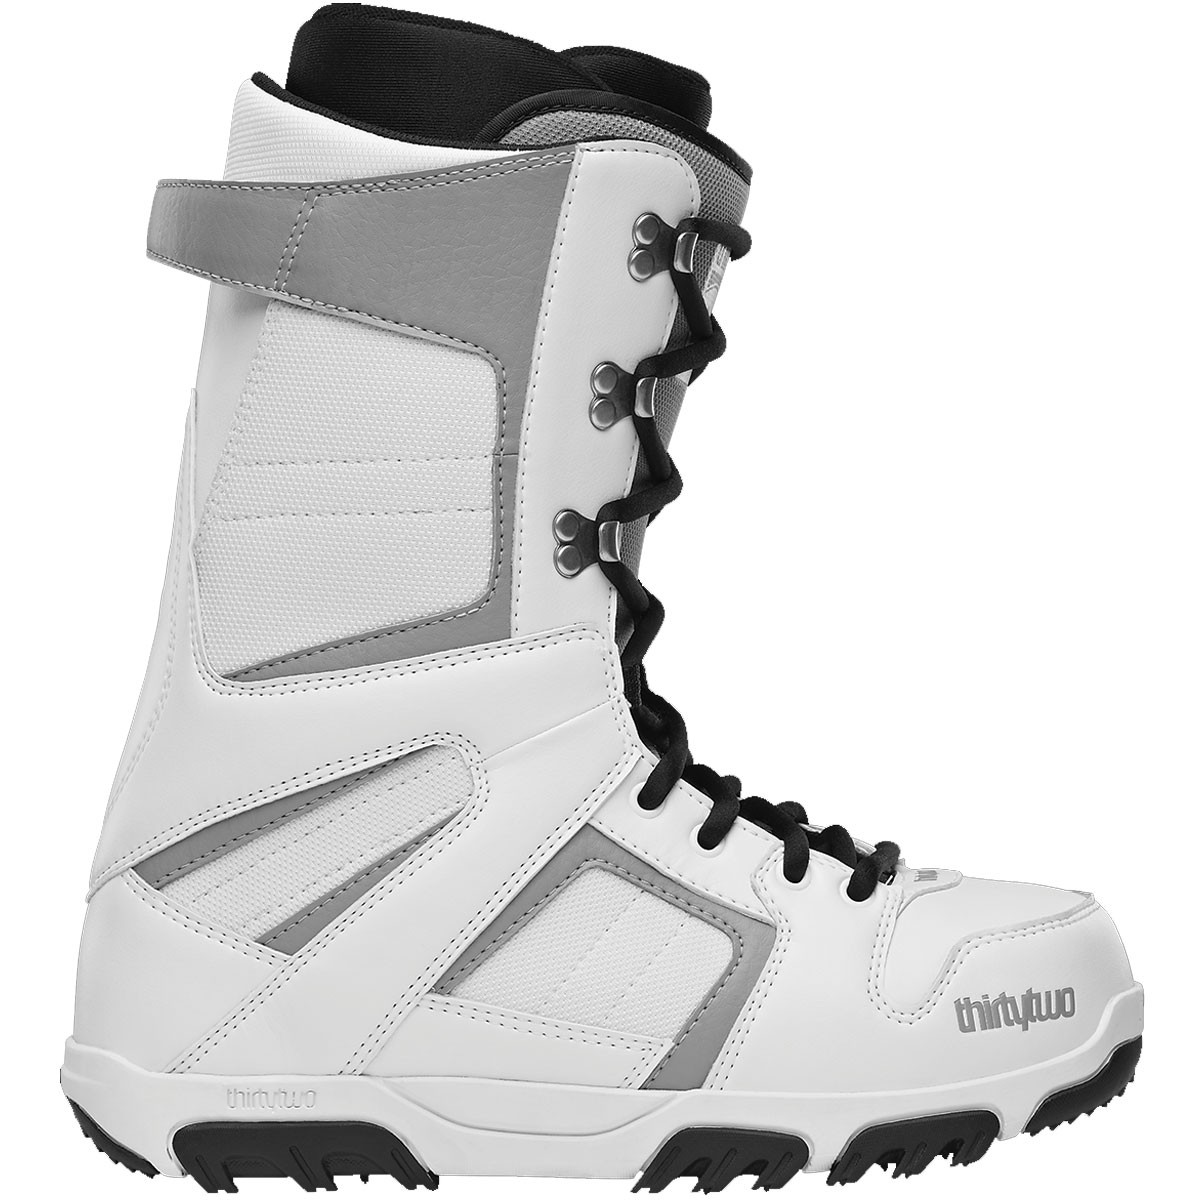 snowboarding boots thirtytwo prion snowboard boots 2014 - white OQGSXLF